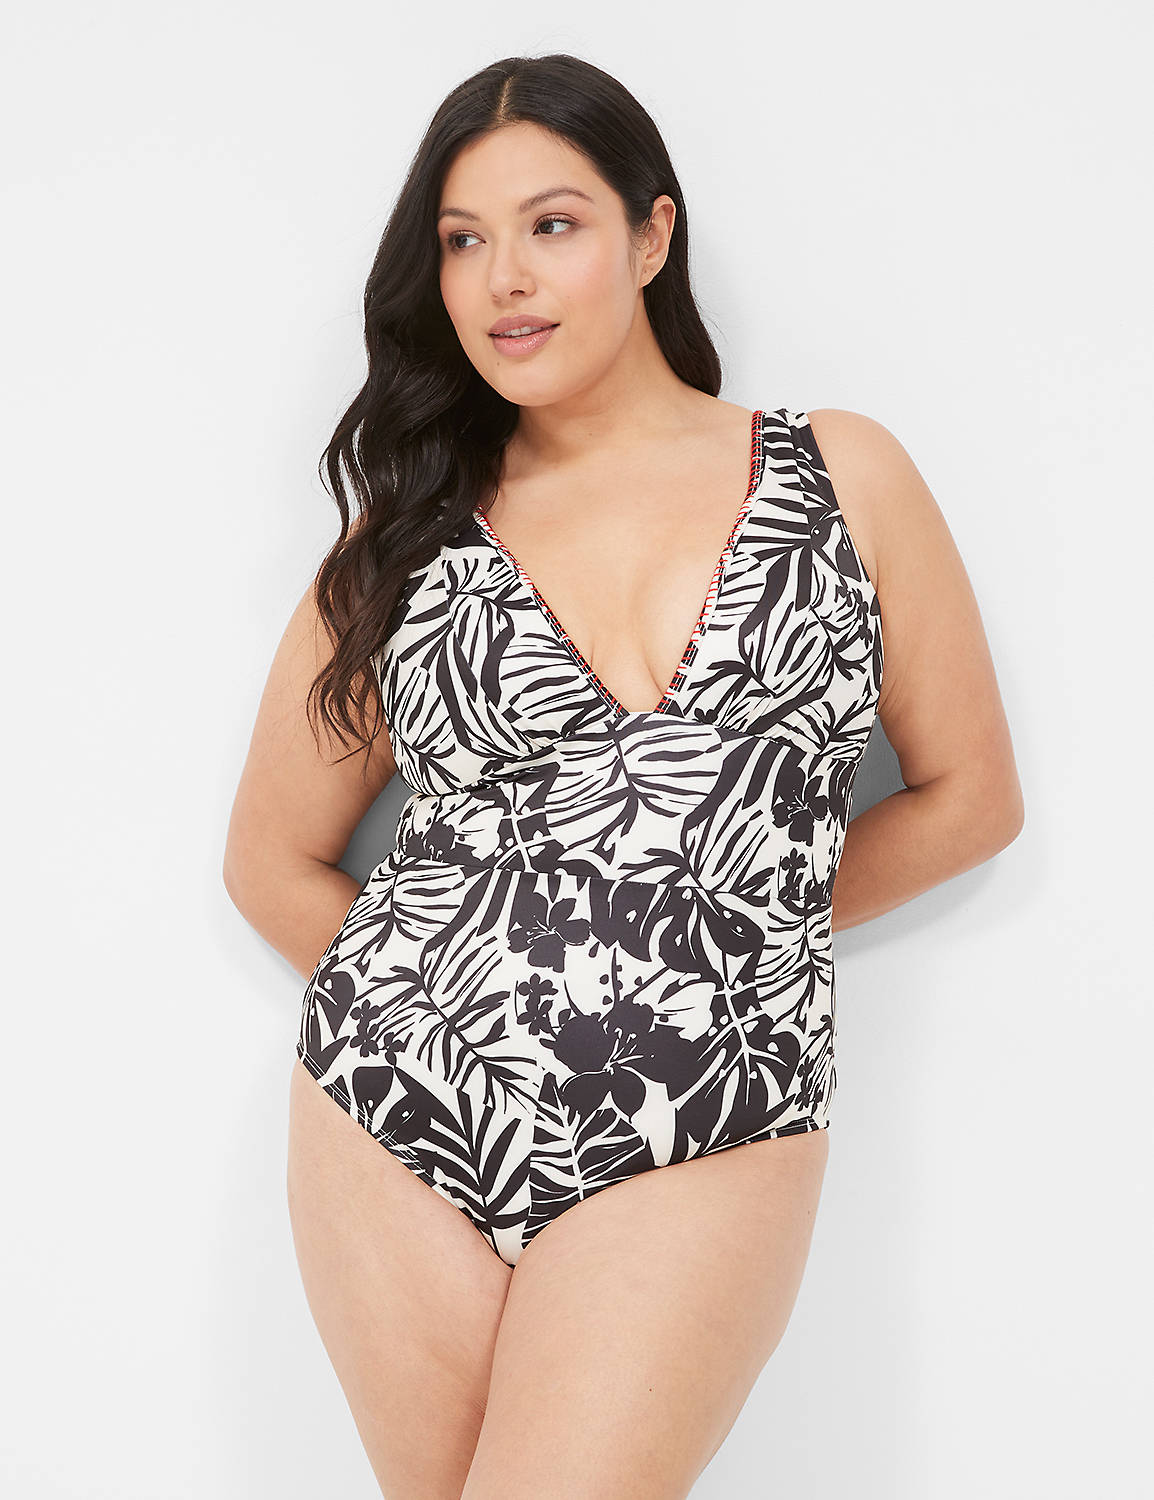 NW Plunge One Piece 1140353 Product Image 1